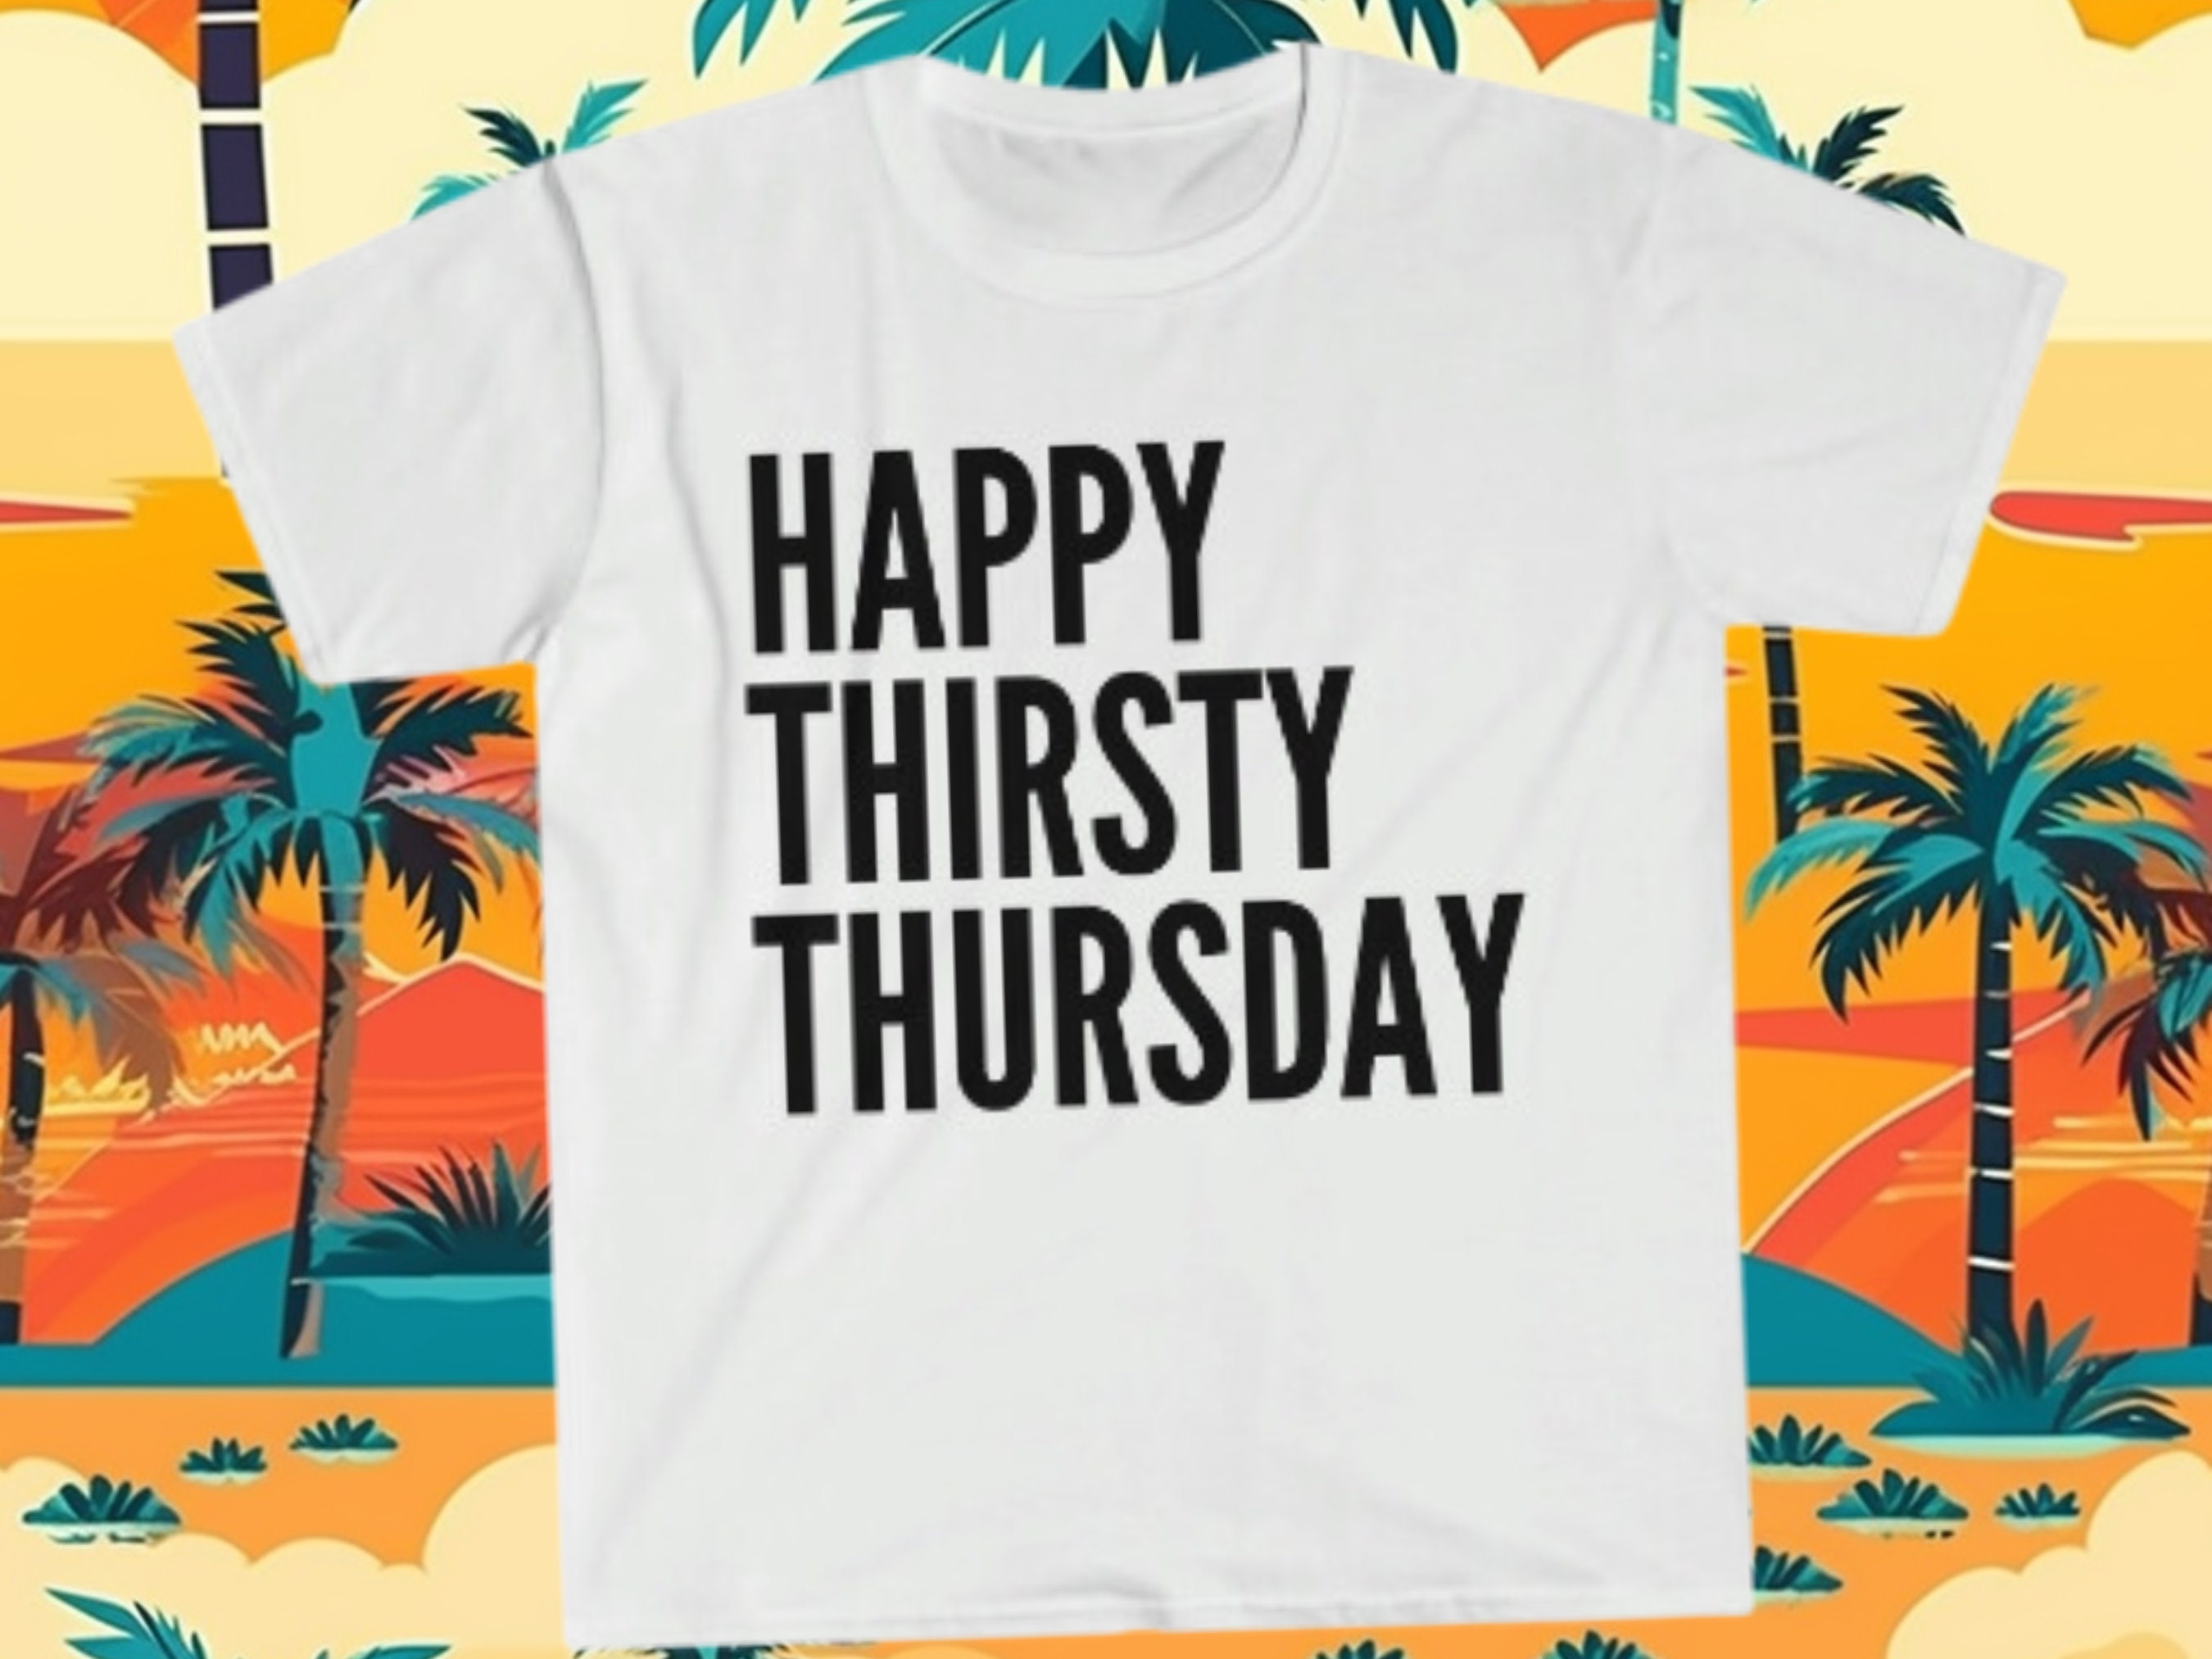 Happy Thirsty Shirt One of the Days the Week - Etsy